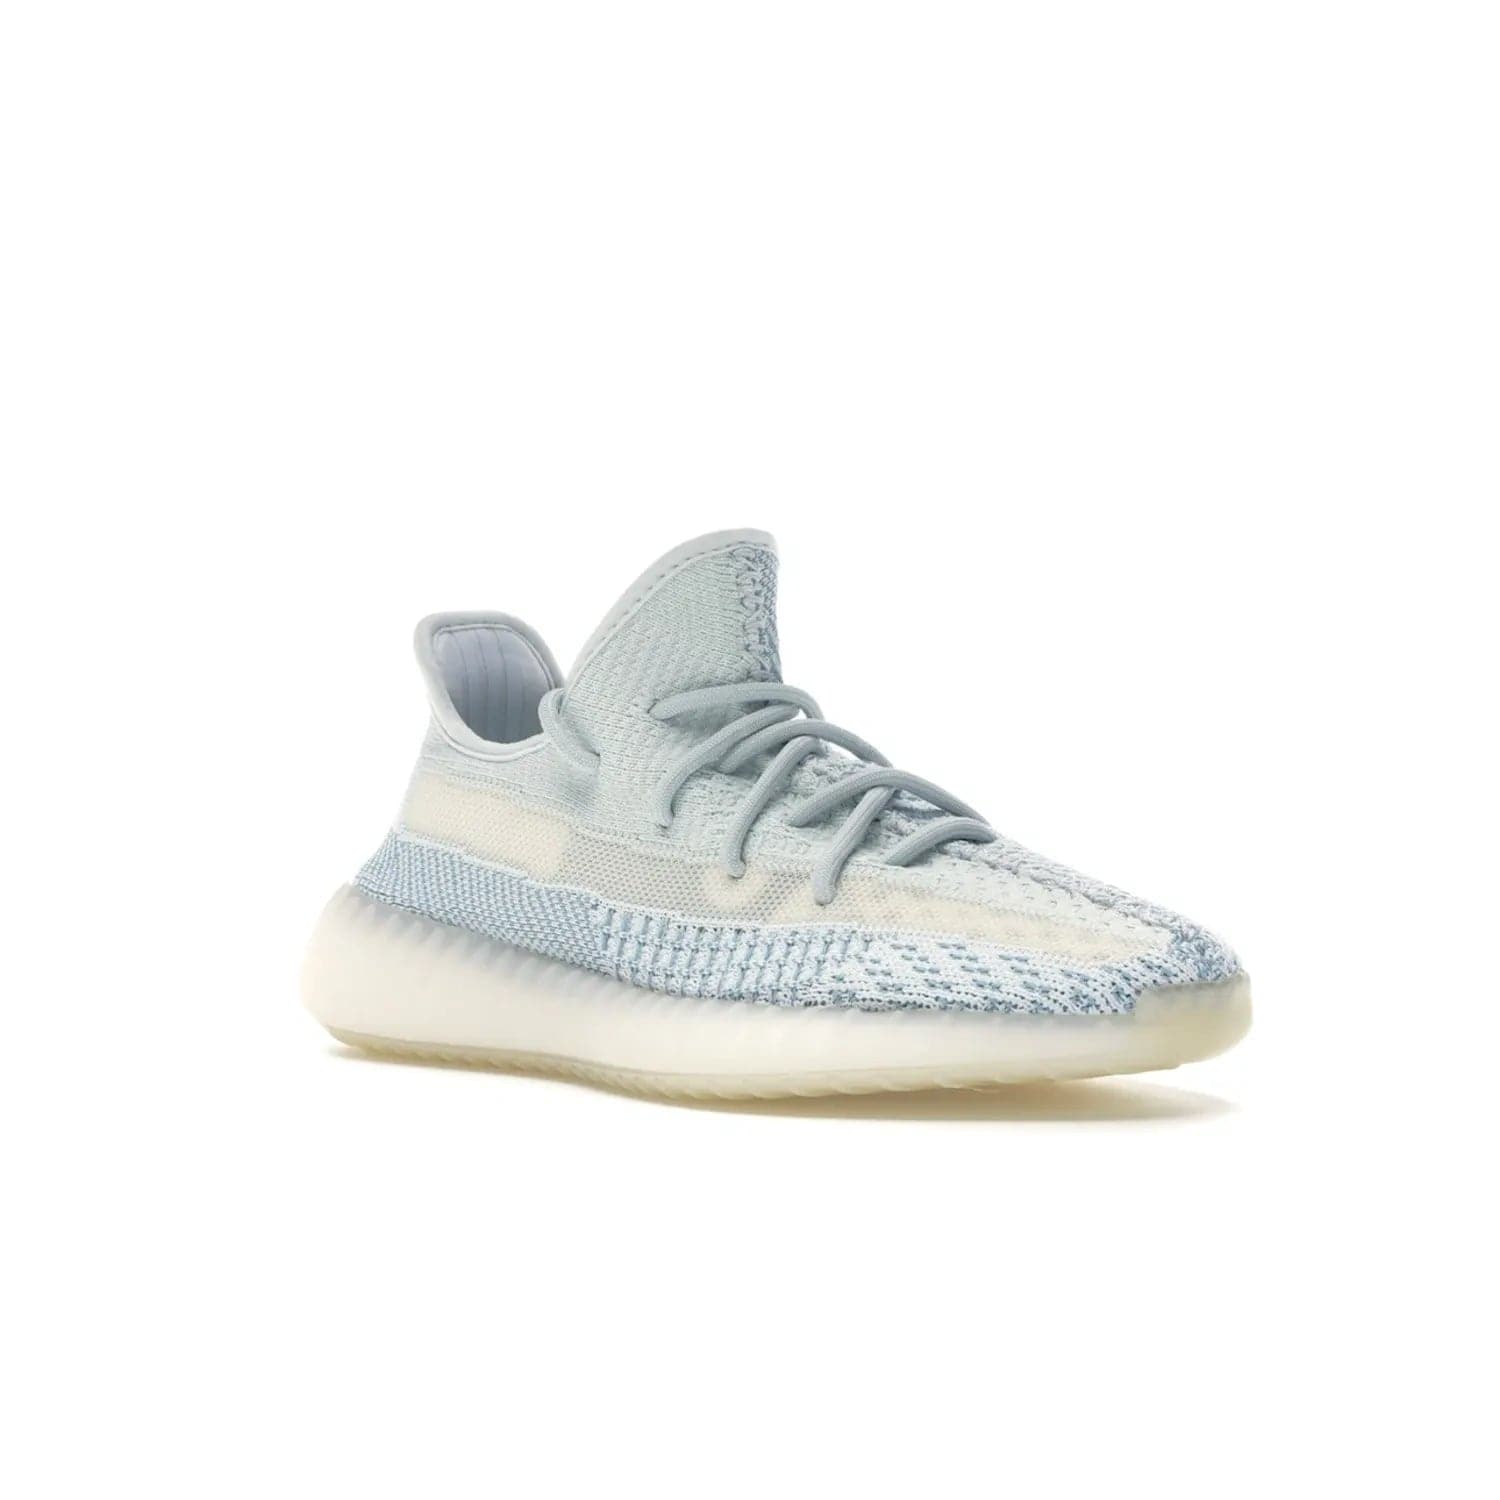 adidas Yeezy Boost 350 V2 Cloud White (Non-Reflective) - Image 5 - Only at www.BallersClubKickz.com - Adidas Yeezy Boost 350 V2 Cloud White (Non-Reflective) features Primeknit fabric and a unique, eye-catching design of cream, bluish-white, and transparent strip. Step out in timeless style with this eye-catching sneaker.